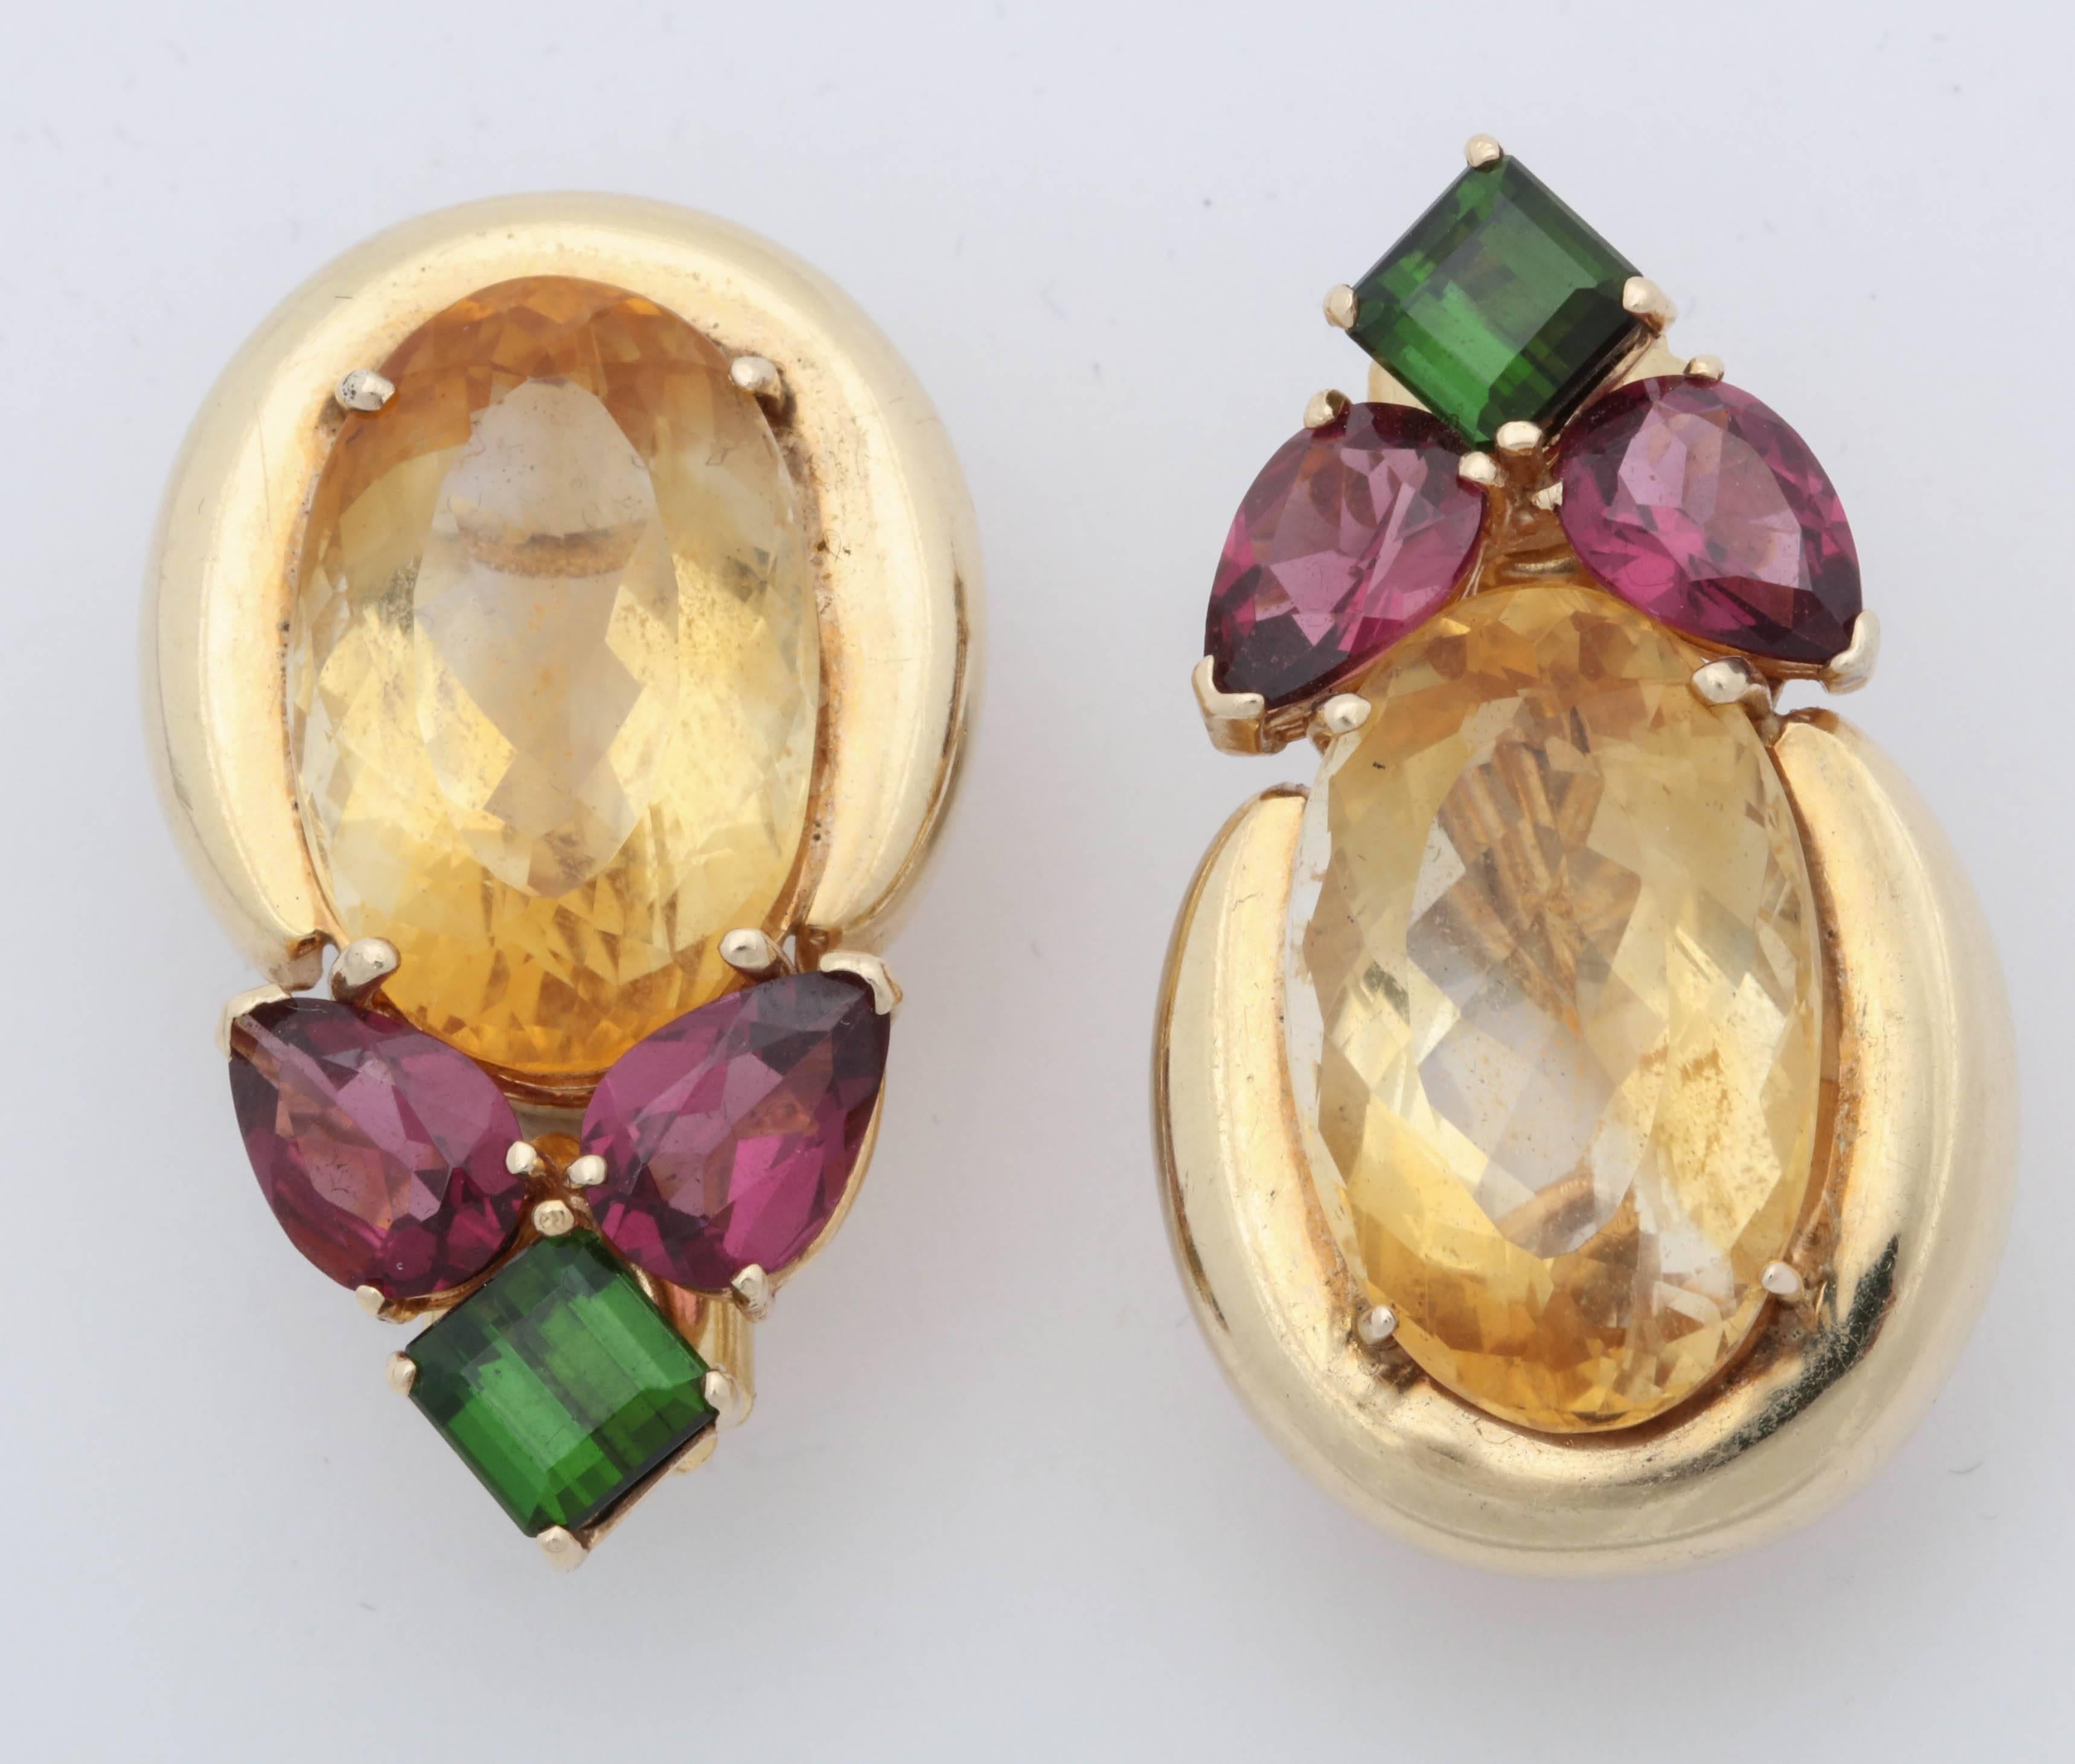 One Pair Of Ladies High Polish 14kt Yellow Gold Earrings Designed With Two Multifaceted Oval Shaped Citrines Measuring Approximately 19MM Each Stone. These Reversible Earrings Are Also Designed With Four Pear Shaped Pink Tourmalines Weighing